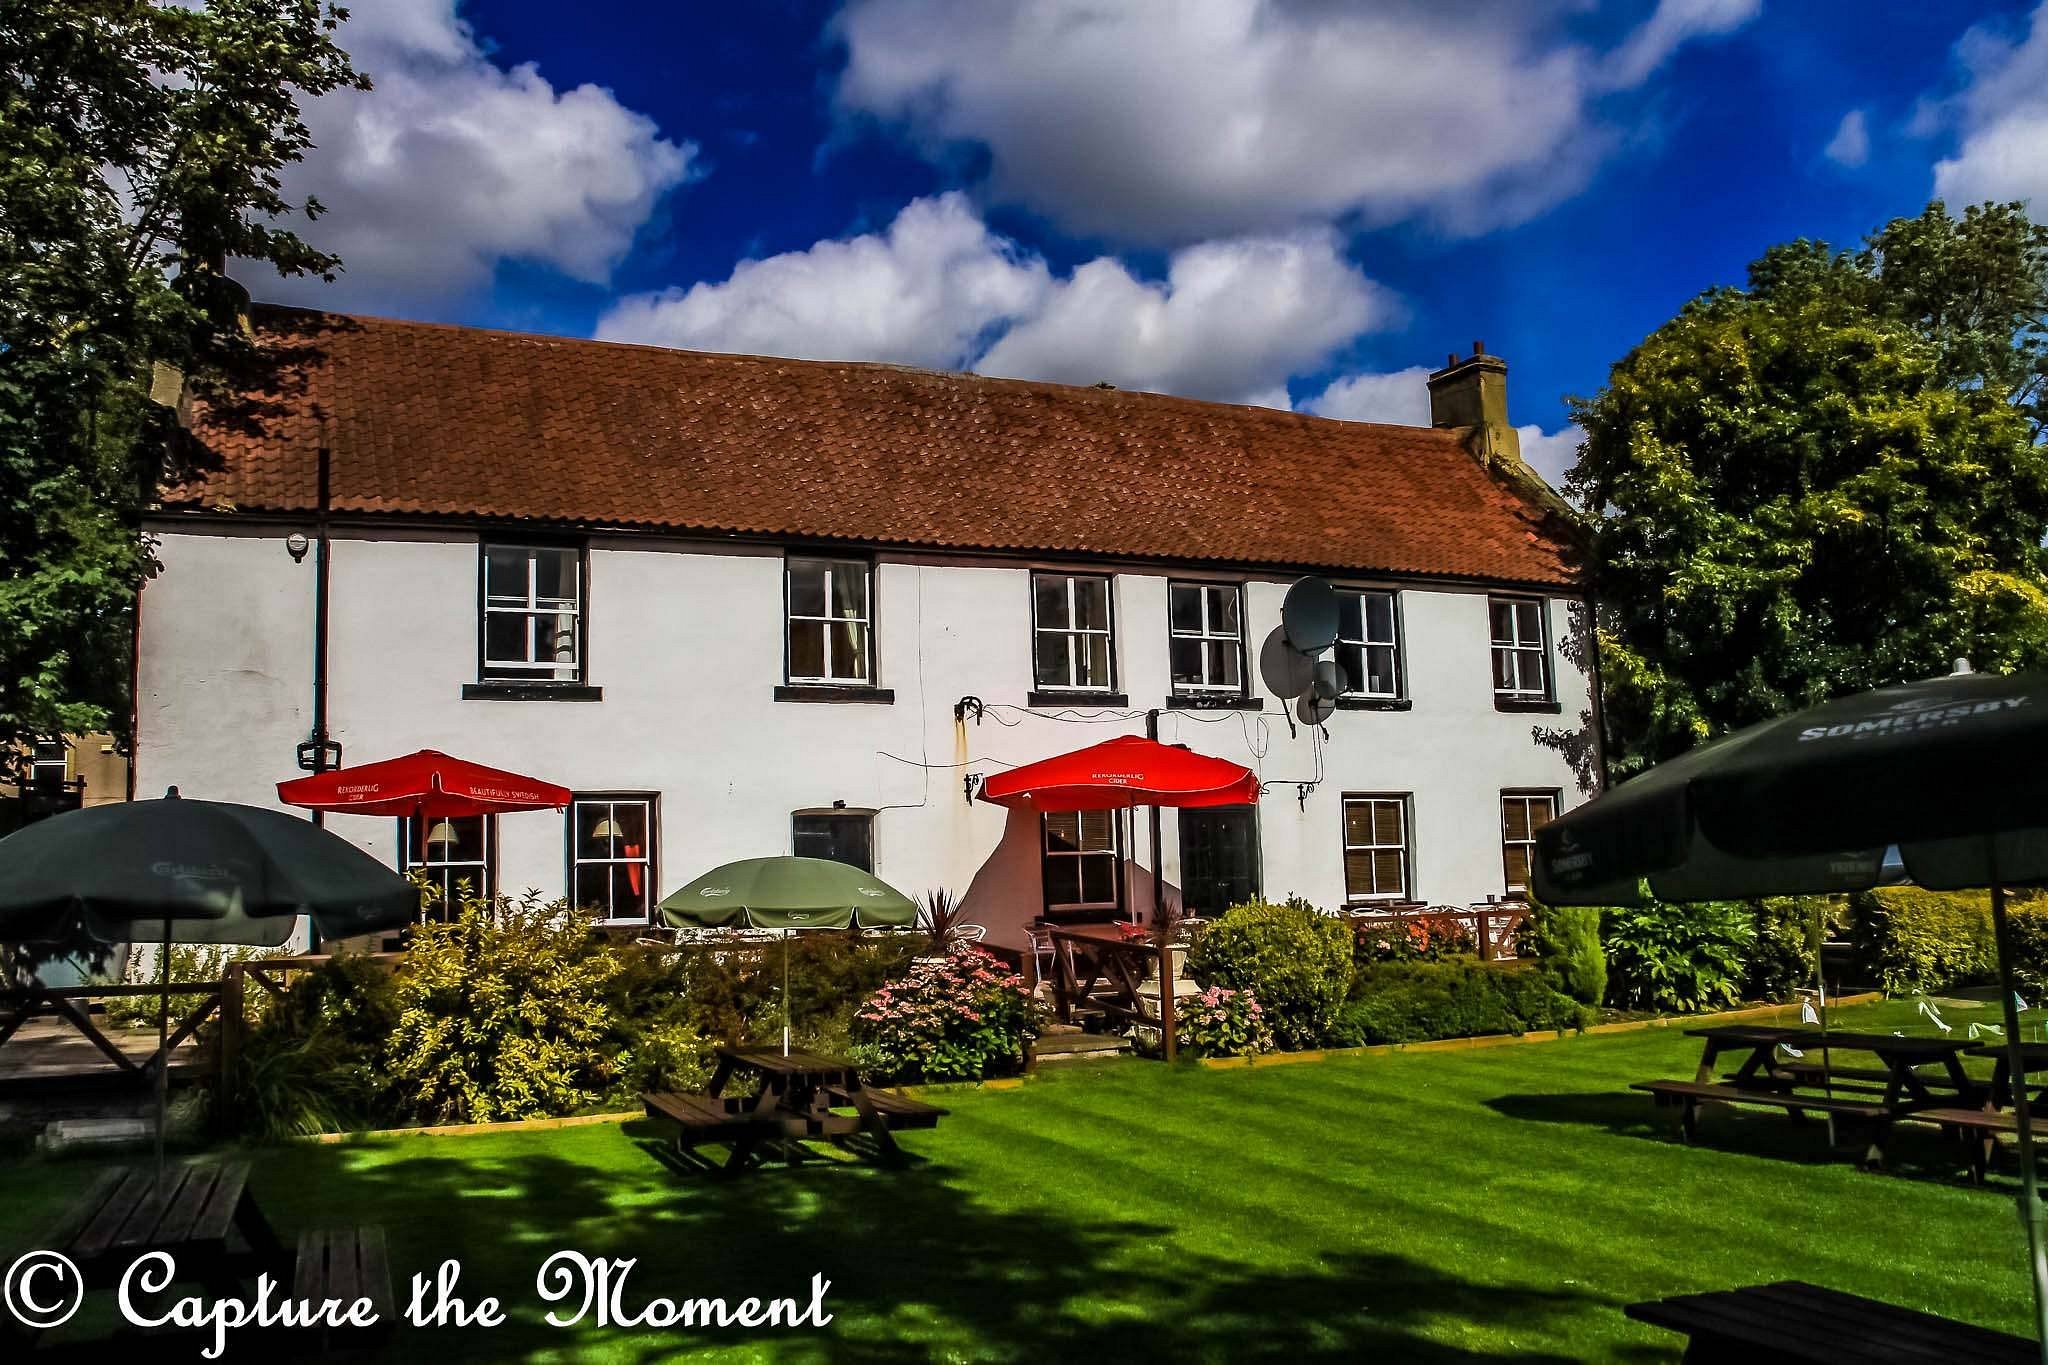 The Manor House Hotel image